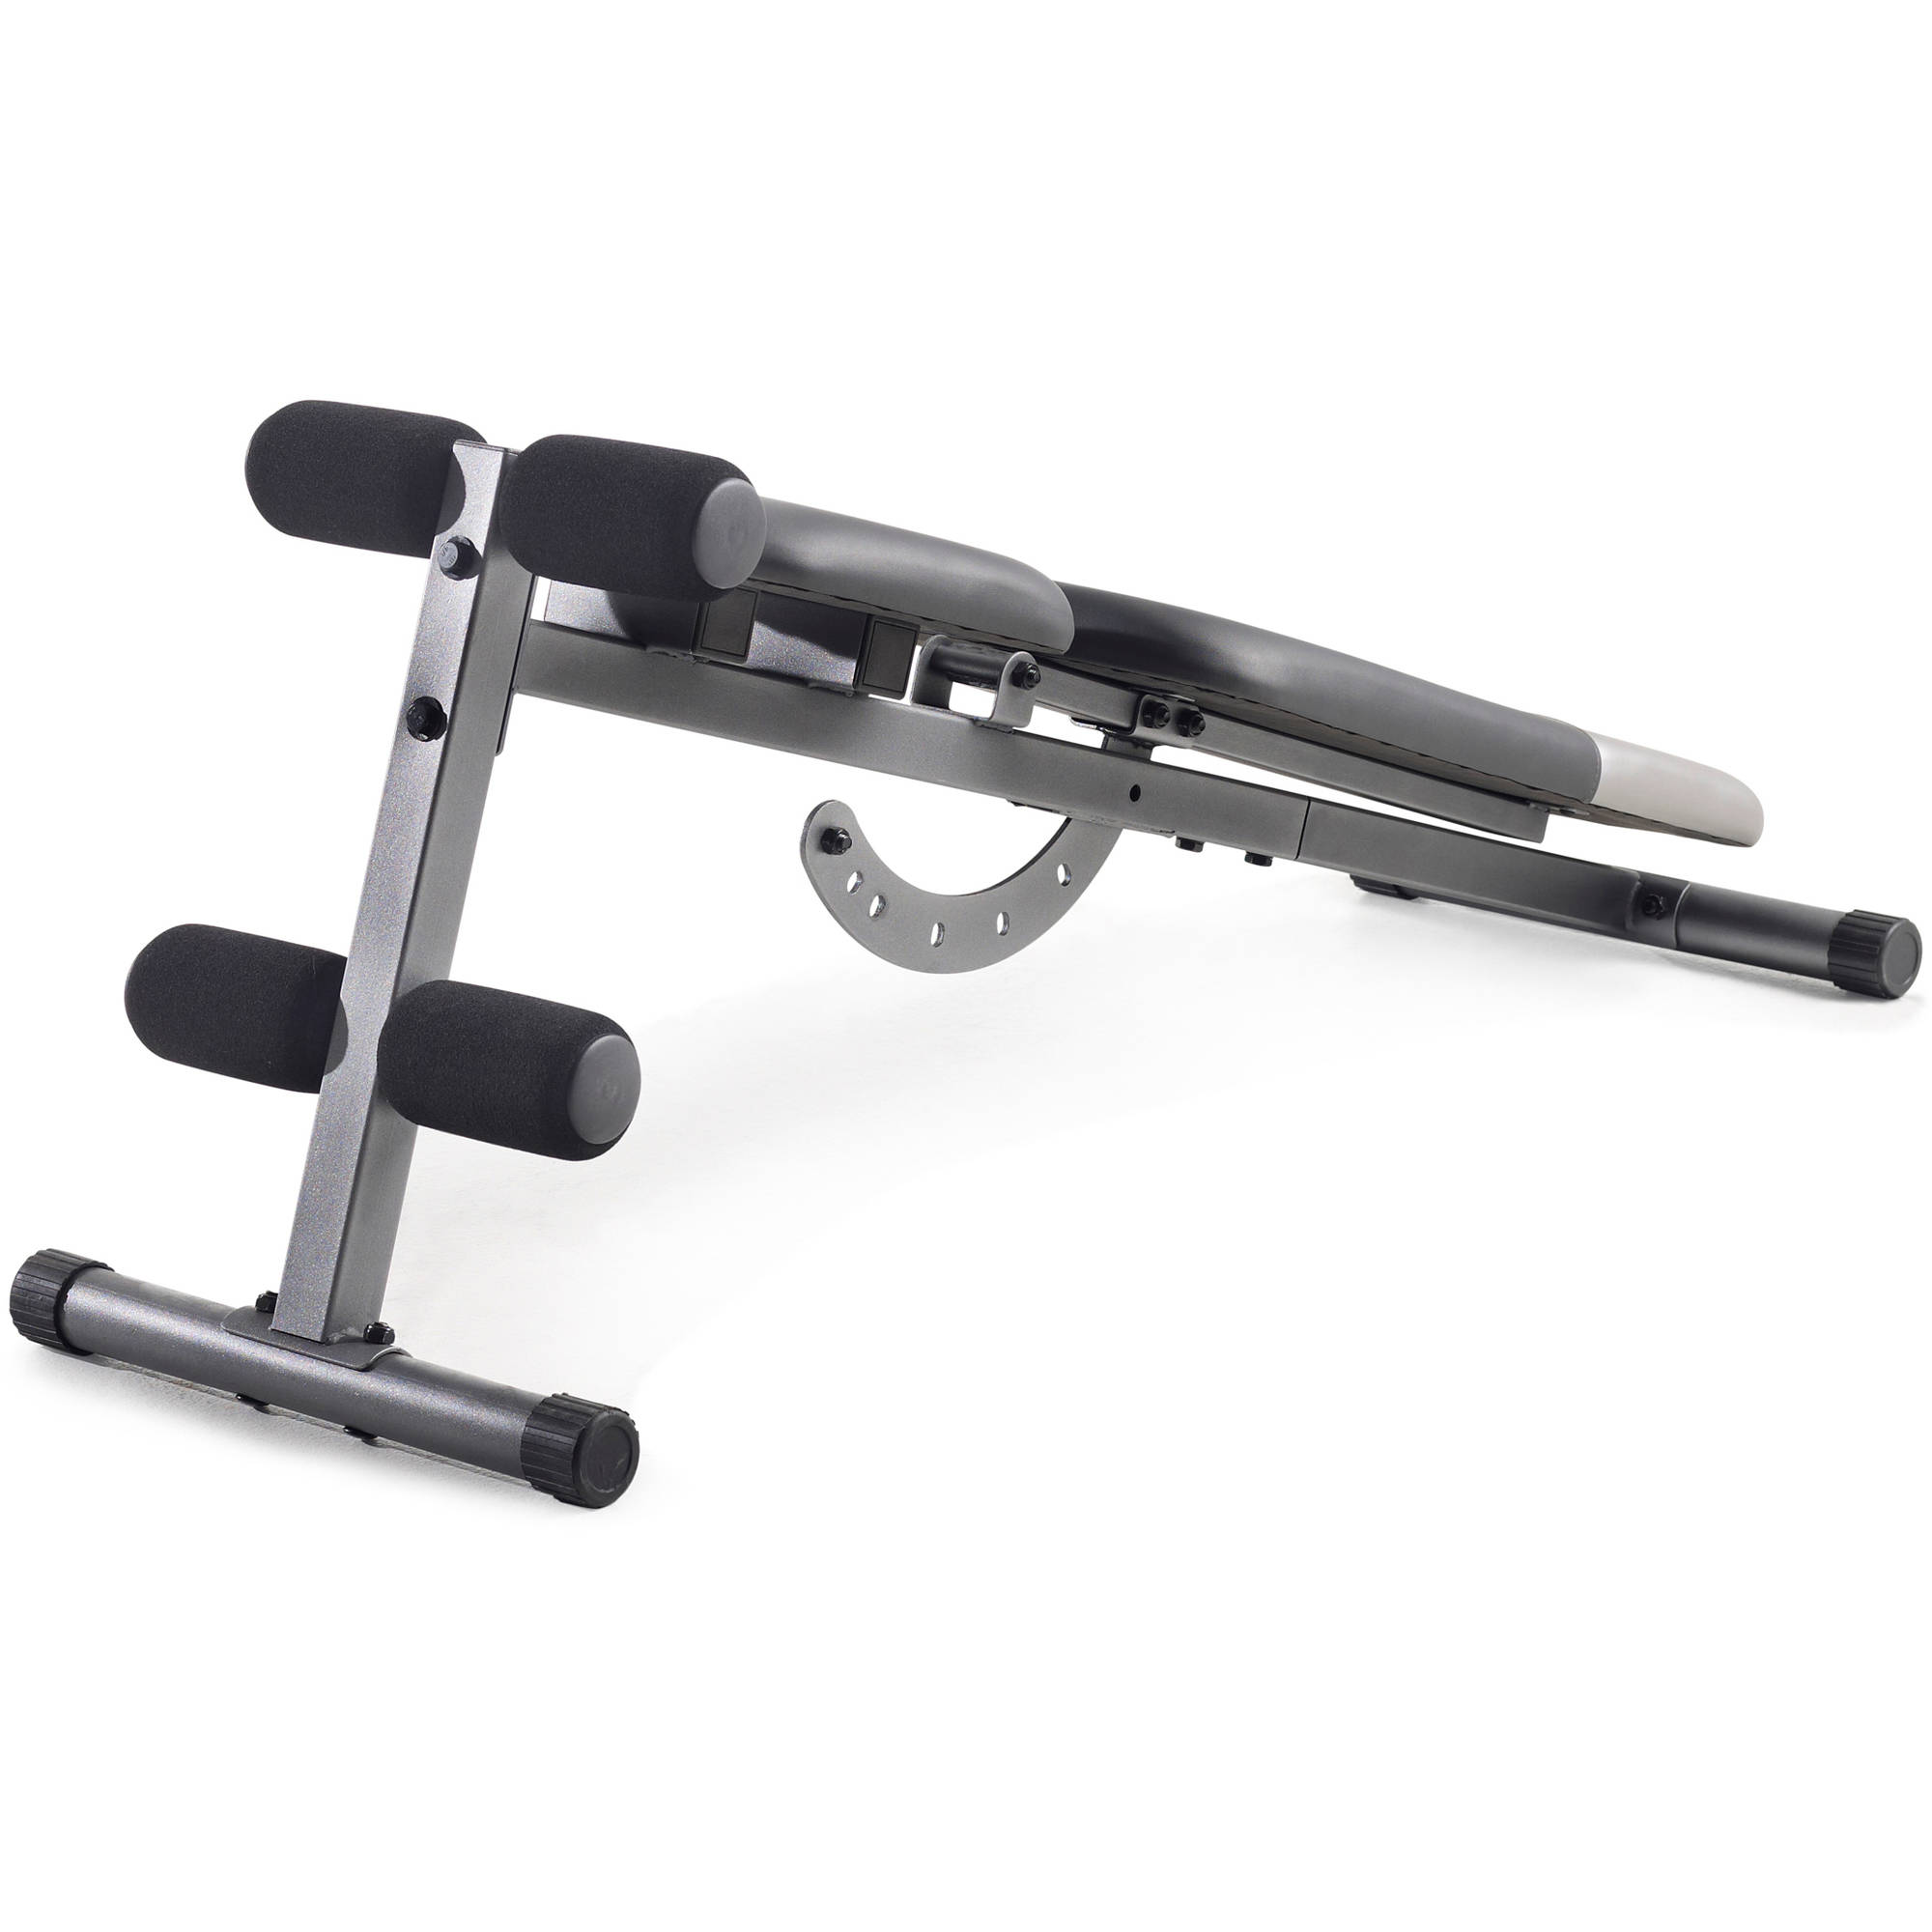 Gold's Gym XR 5.9 Adjustable Slant Workout Weight Bench - image 4 of 4